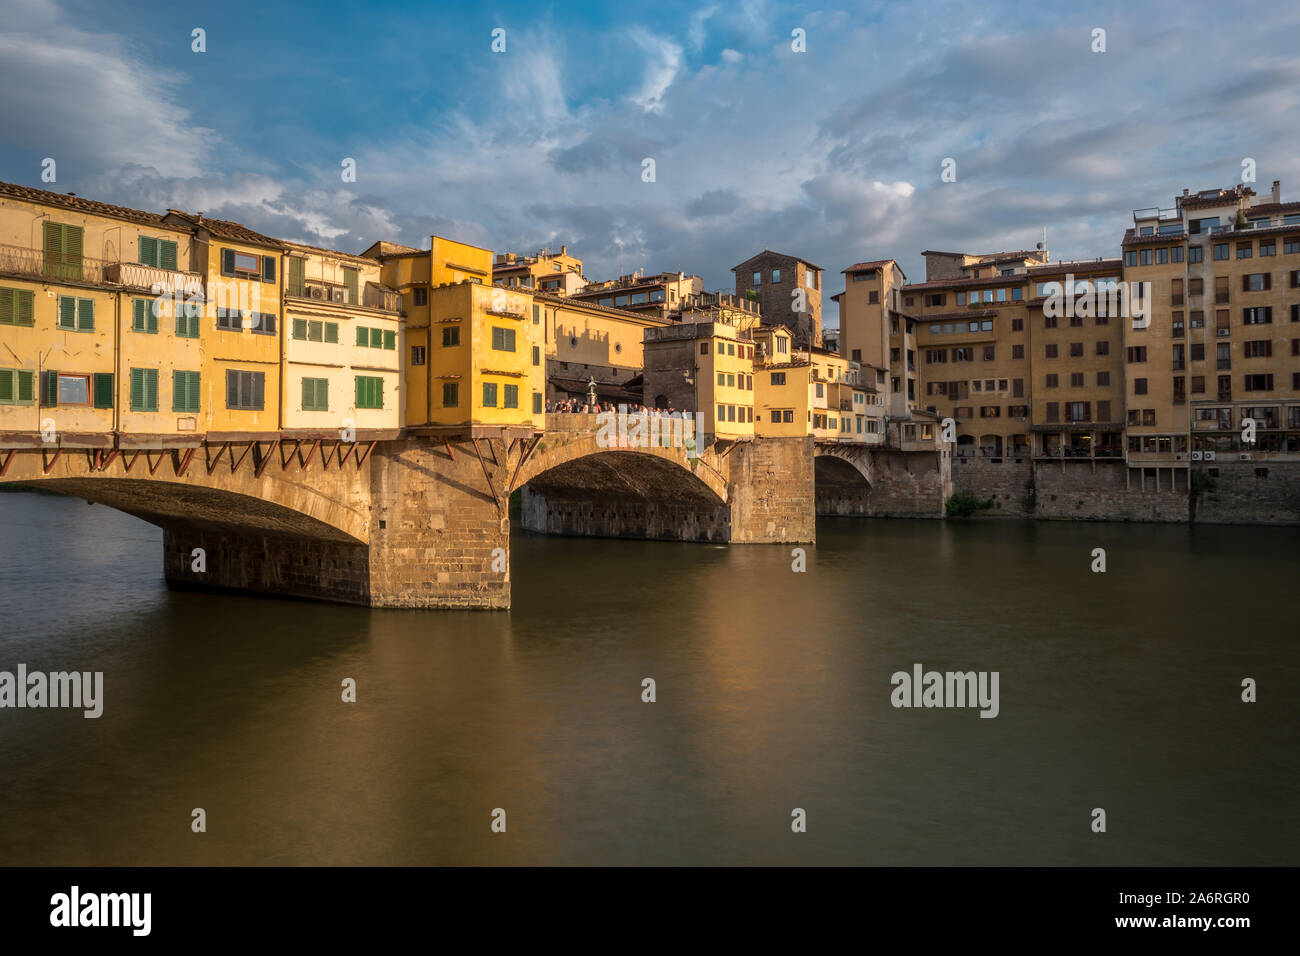 Side view of medieval stone bridge Ponte Vecchio over the Arno River in Florence, Tuscany, Italy. View from the Lungarno degli Archibusieri. Florence is a popular tourist destination of Europe. Stock Photo